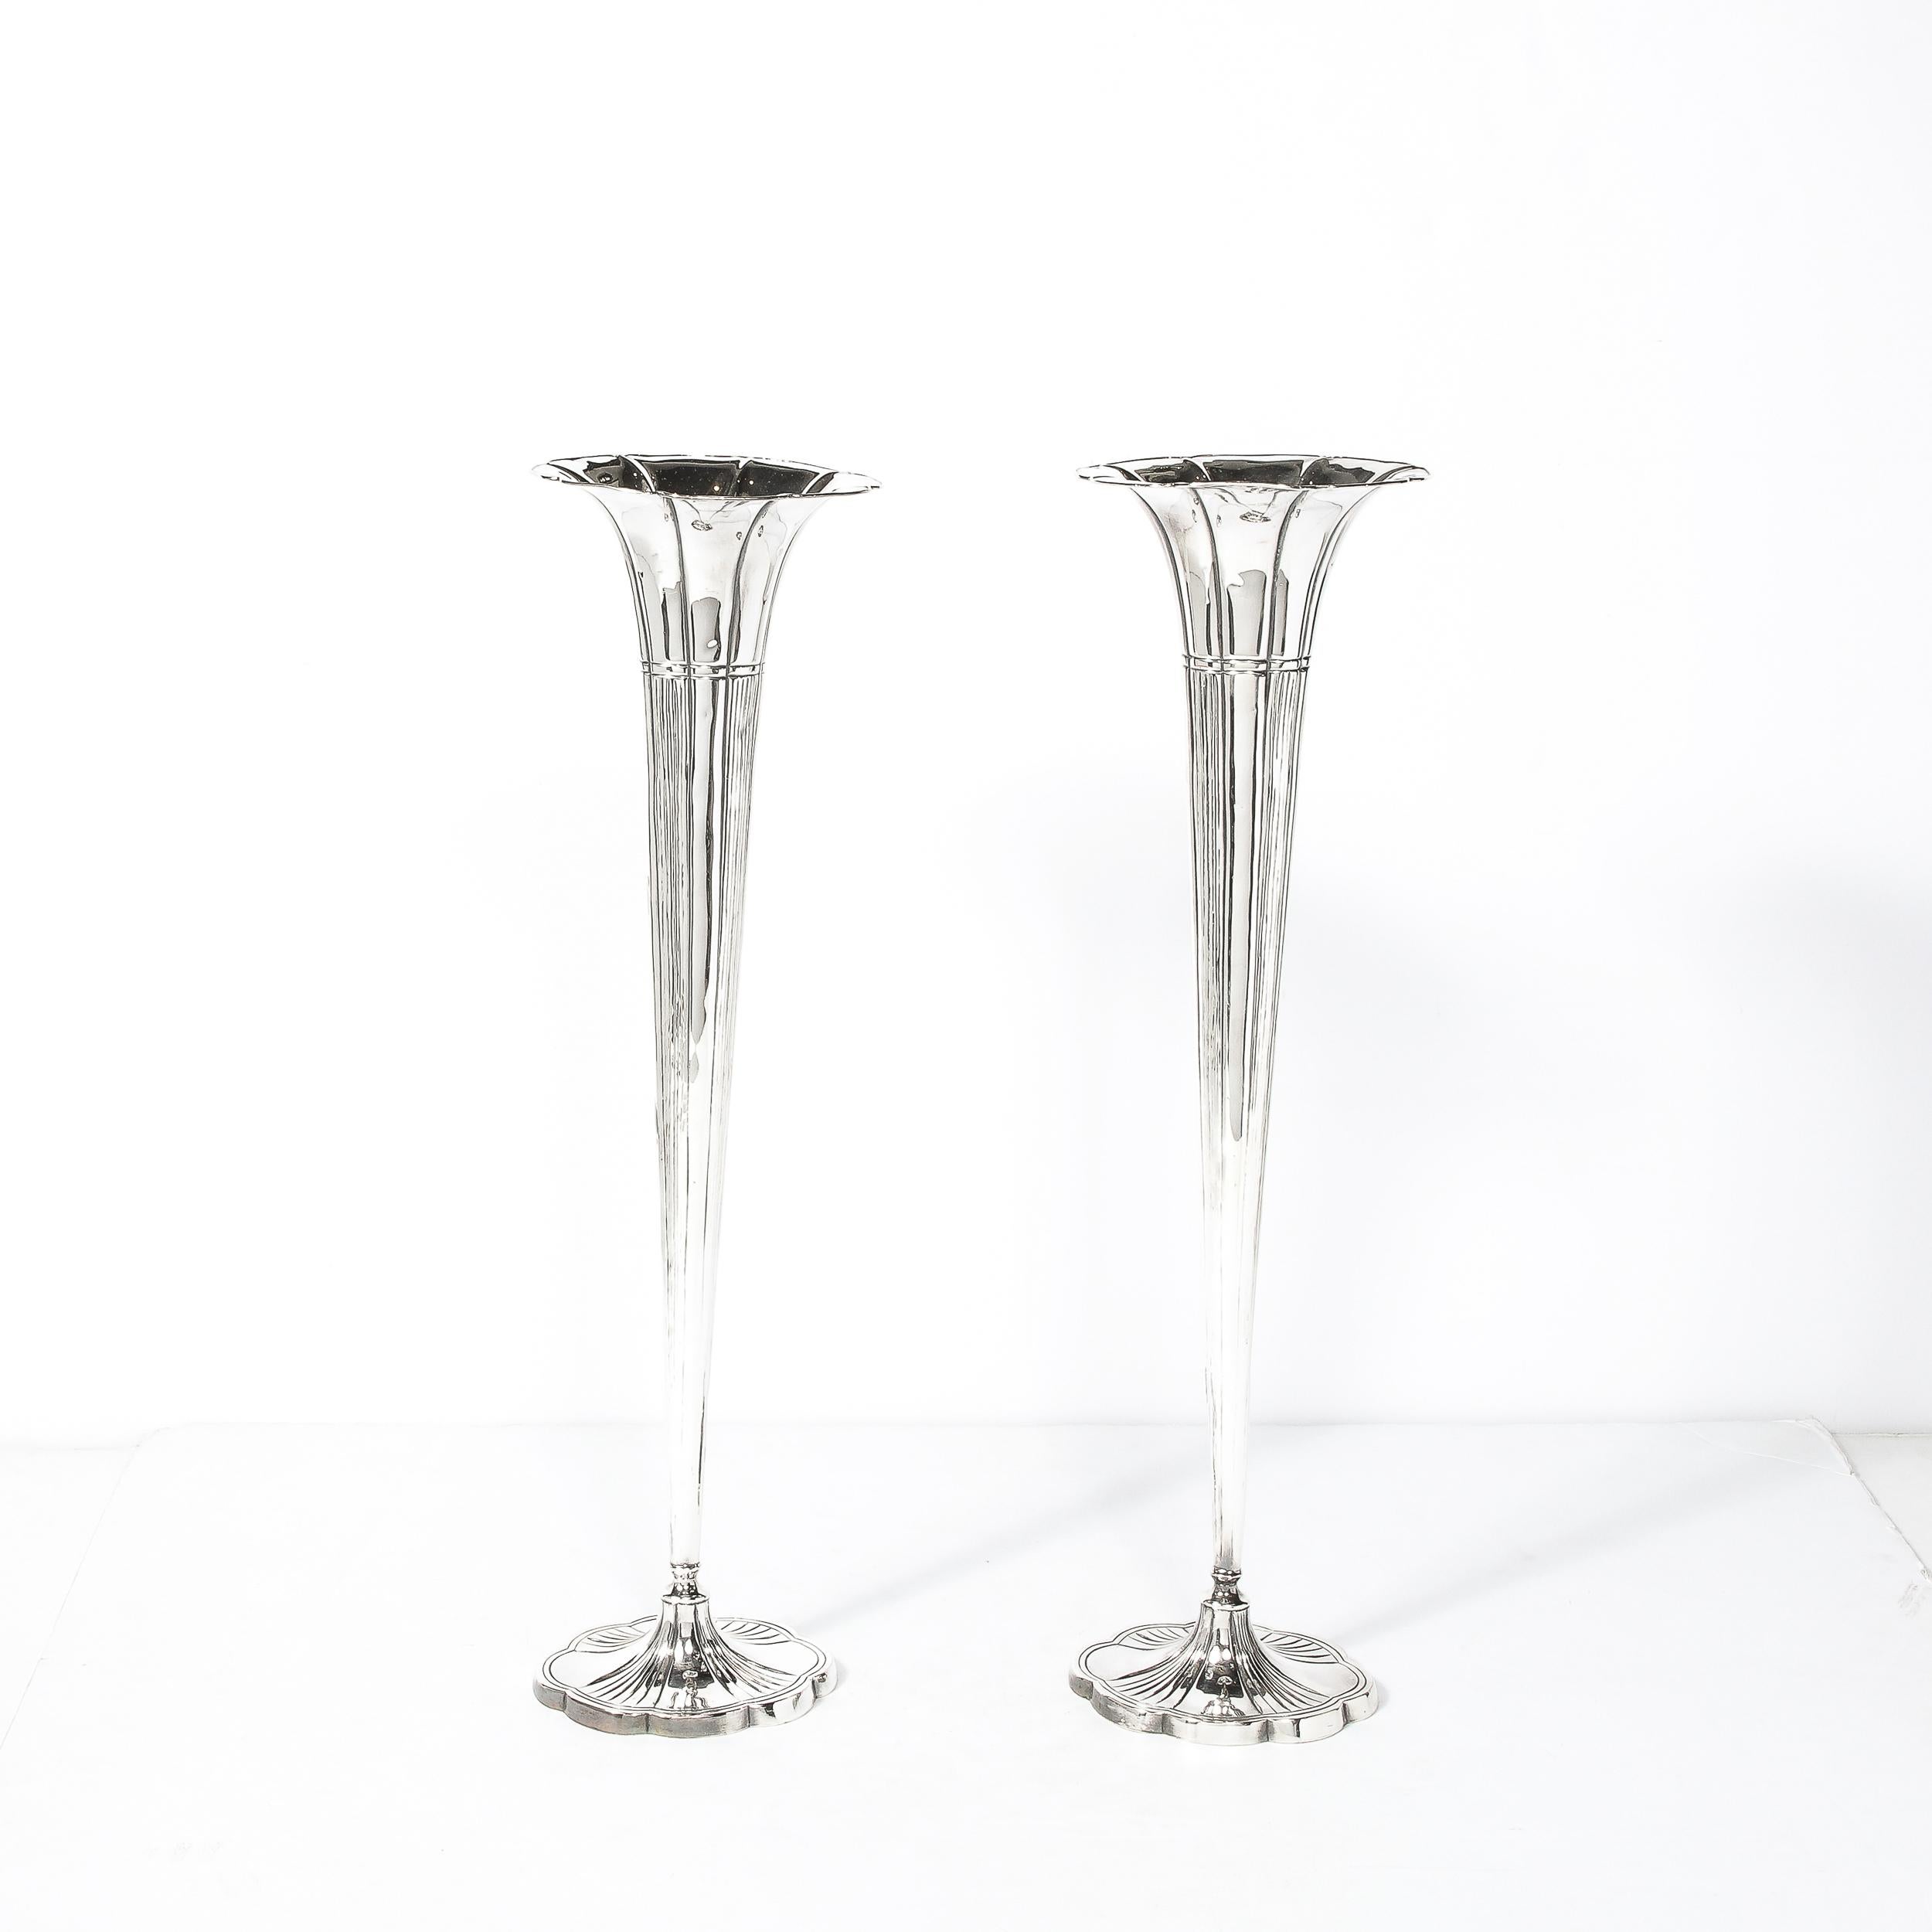 This Pair of Art Deco Silver Plate Fluted Trumpet Vases Originate from the United States Circa 1930. 
Elegant, tall and slender, they achieve a beautiful balance of geometric design and execution using organic forms. Made in weighted sterling